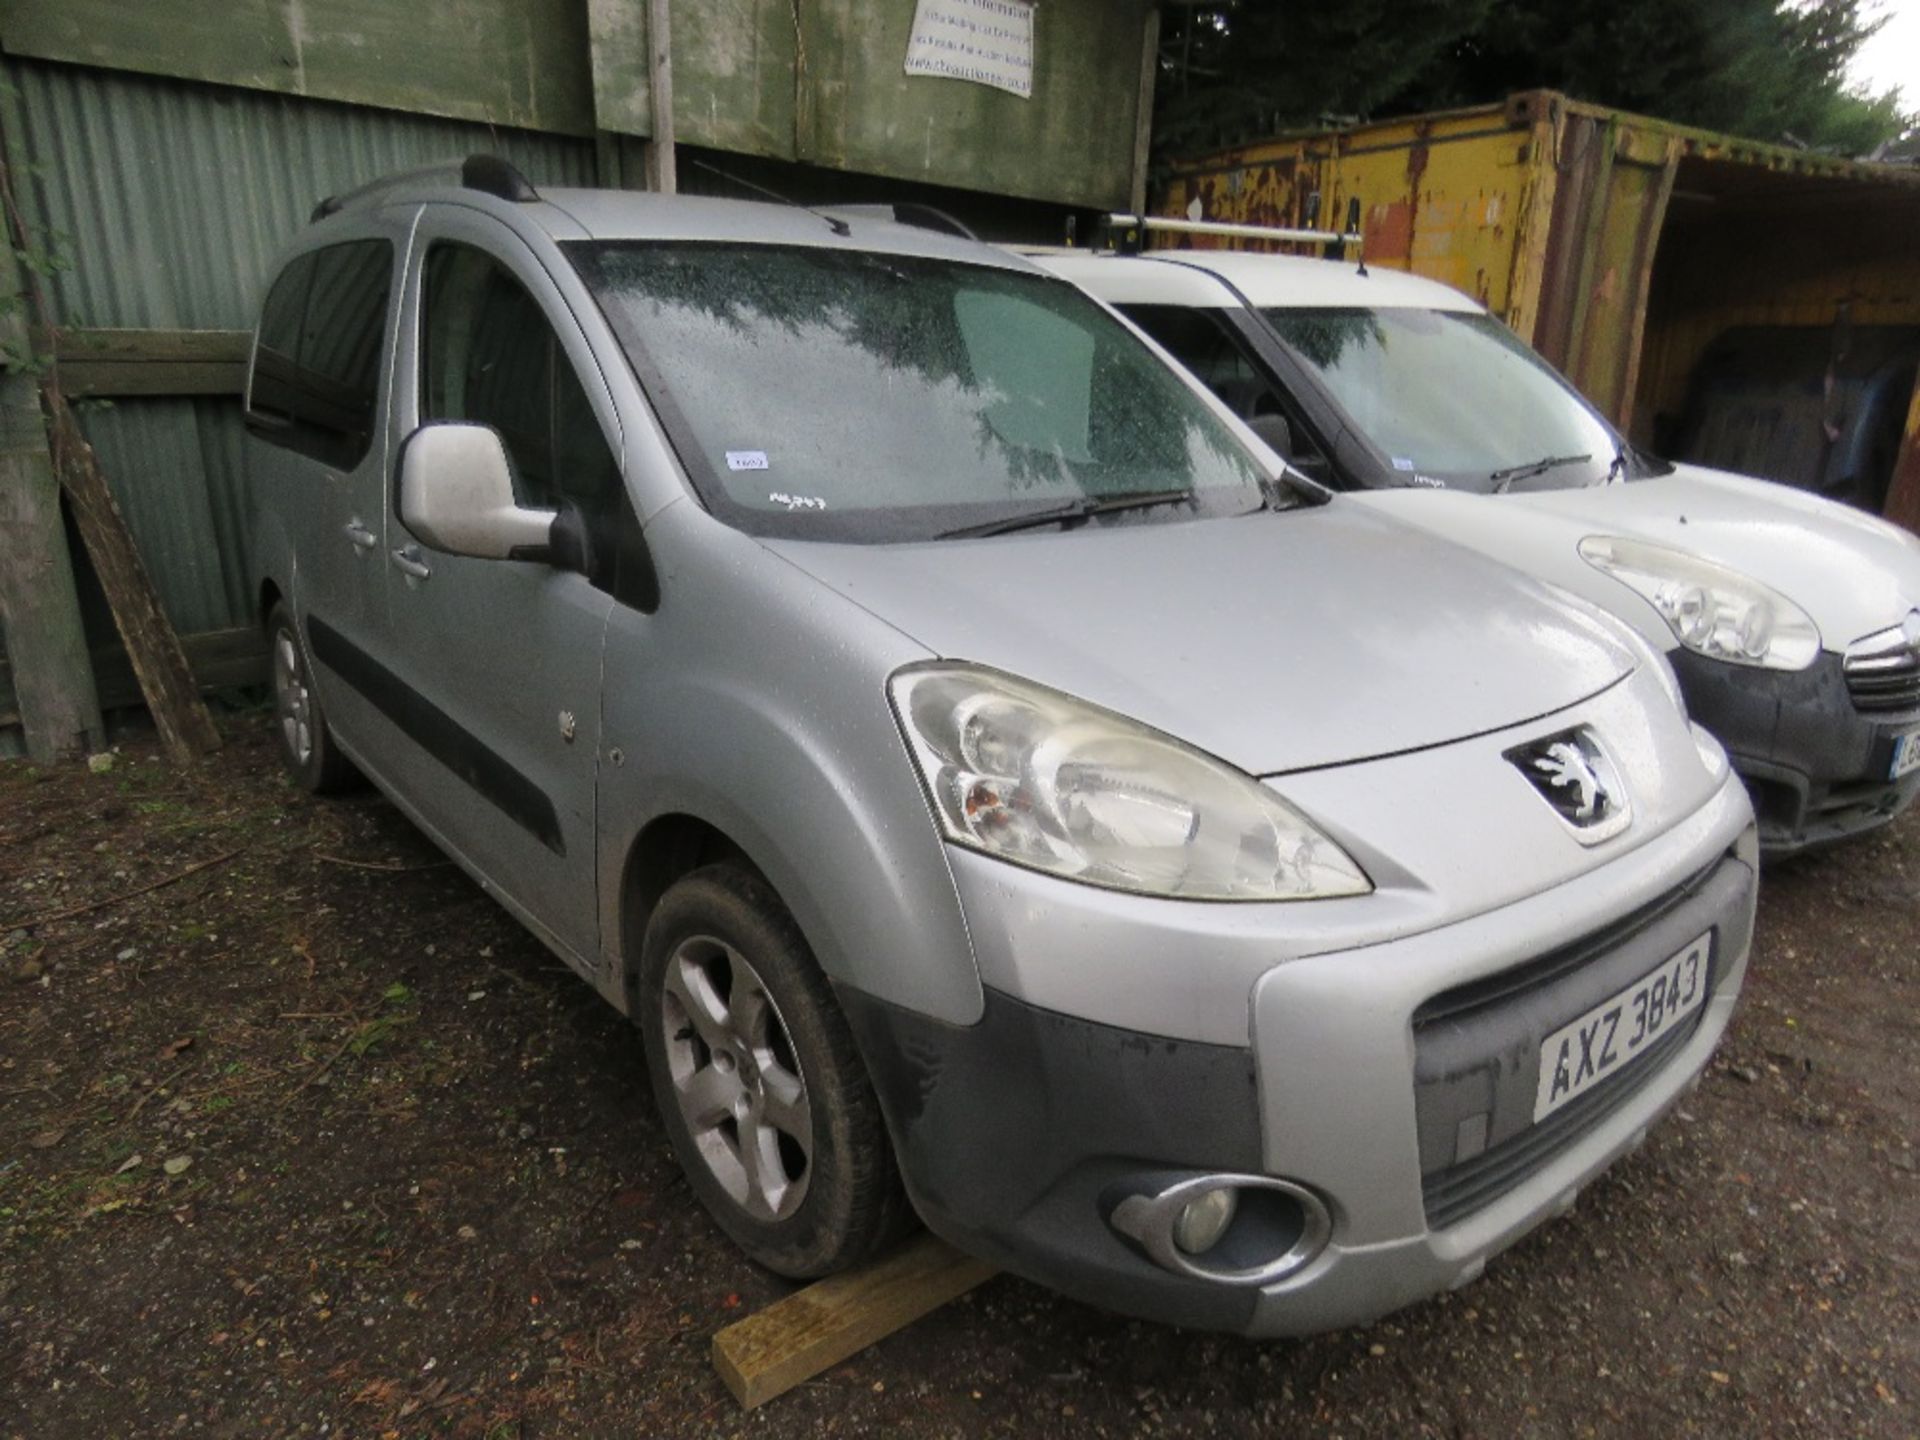 PEUGEOT PARTNER CAR REG:AXZ 3843. WITH V5 FIRST REGISTERED 23/10/2010. MOT EXPIRED. MANUAL GEARBOX.